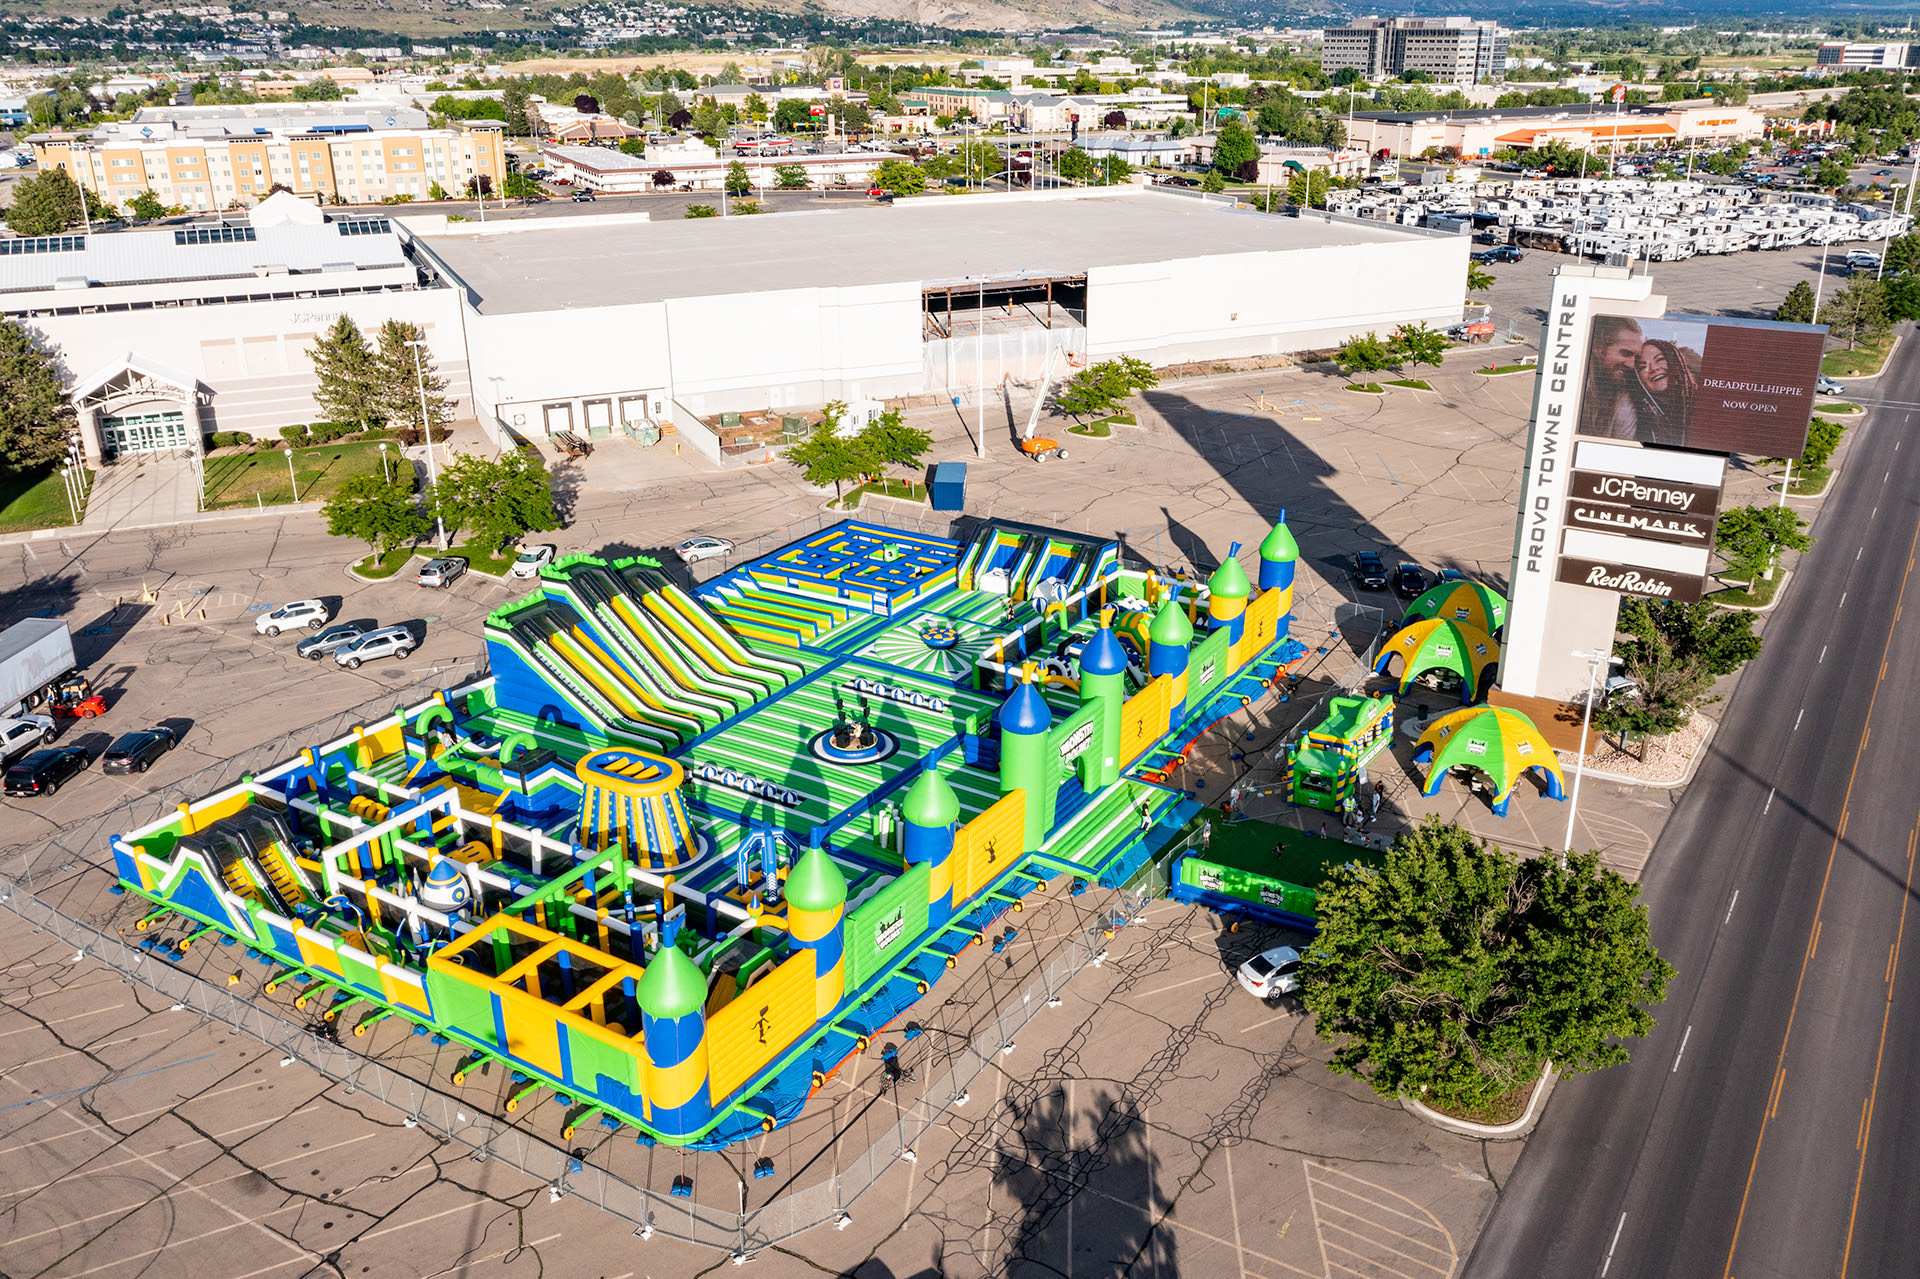 monster-bounce-is-back-in-st.-george-with-giant-slides,-obstacle-courses-and-more-family-fun